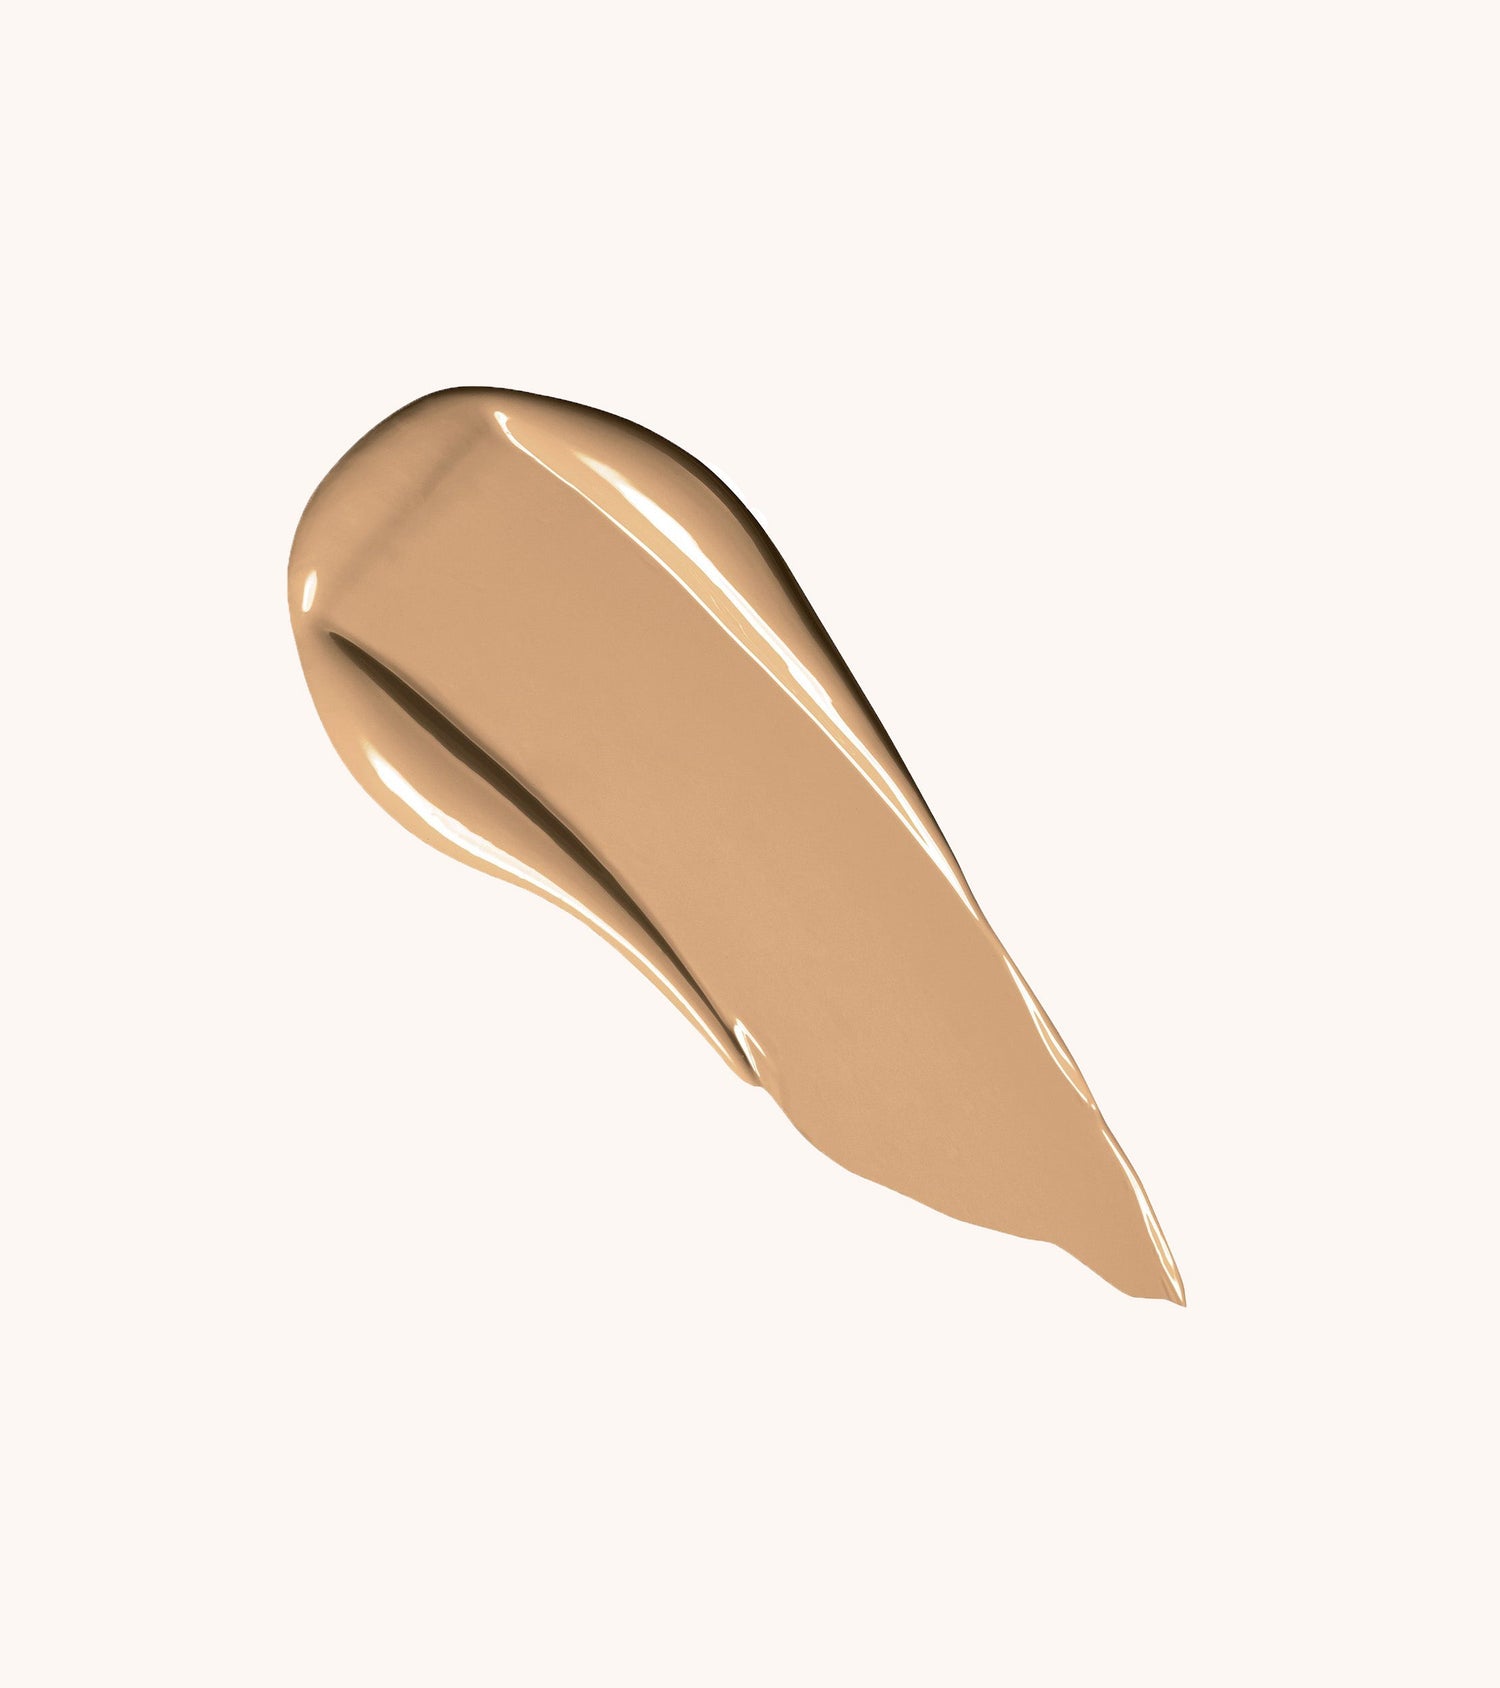 Authentik Skin Perfector Concealer (110 Embodied) Main Image featured